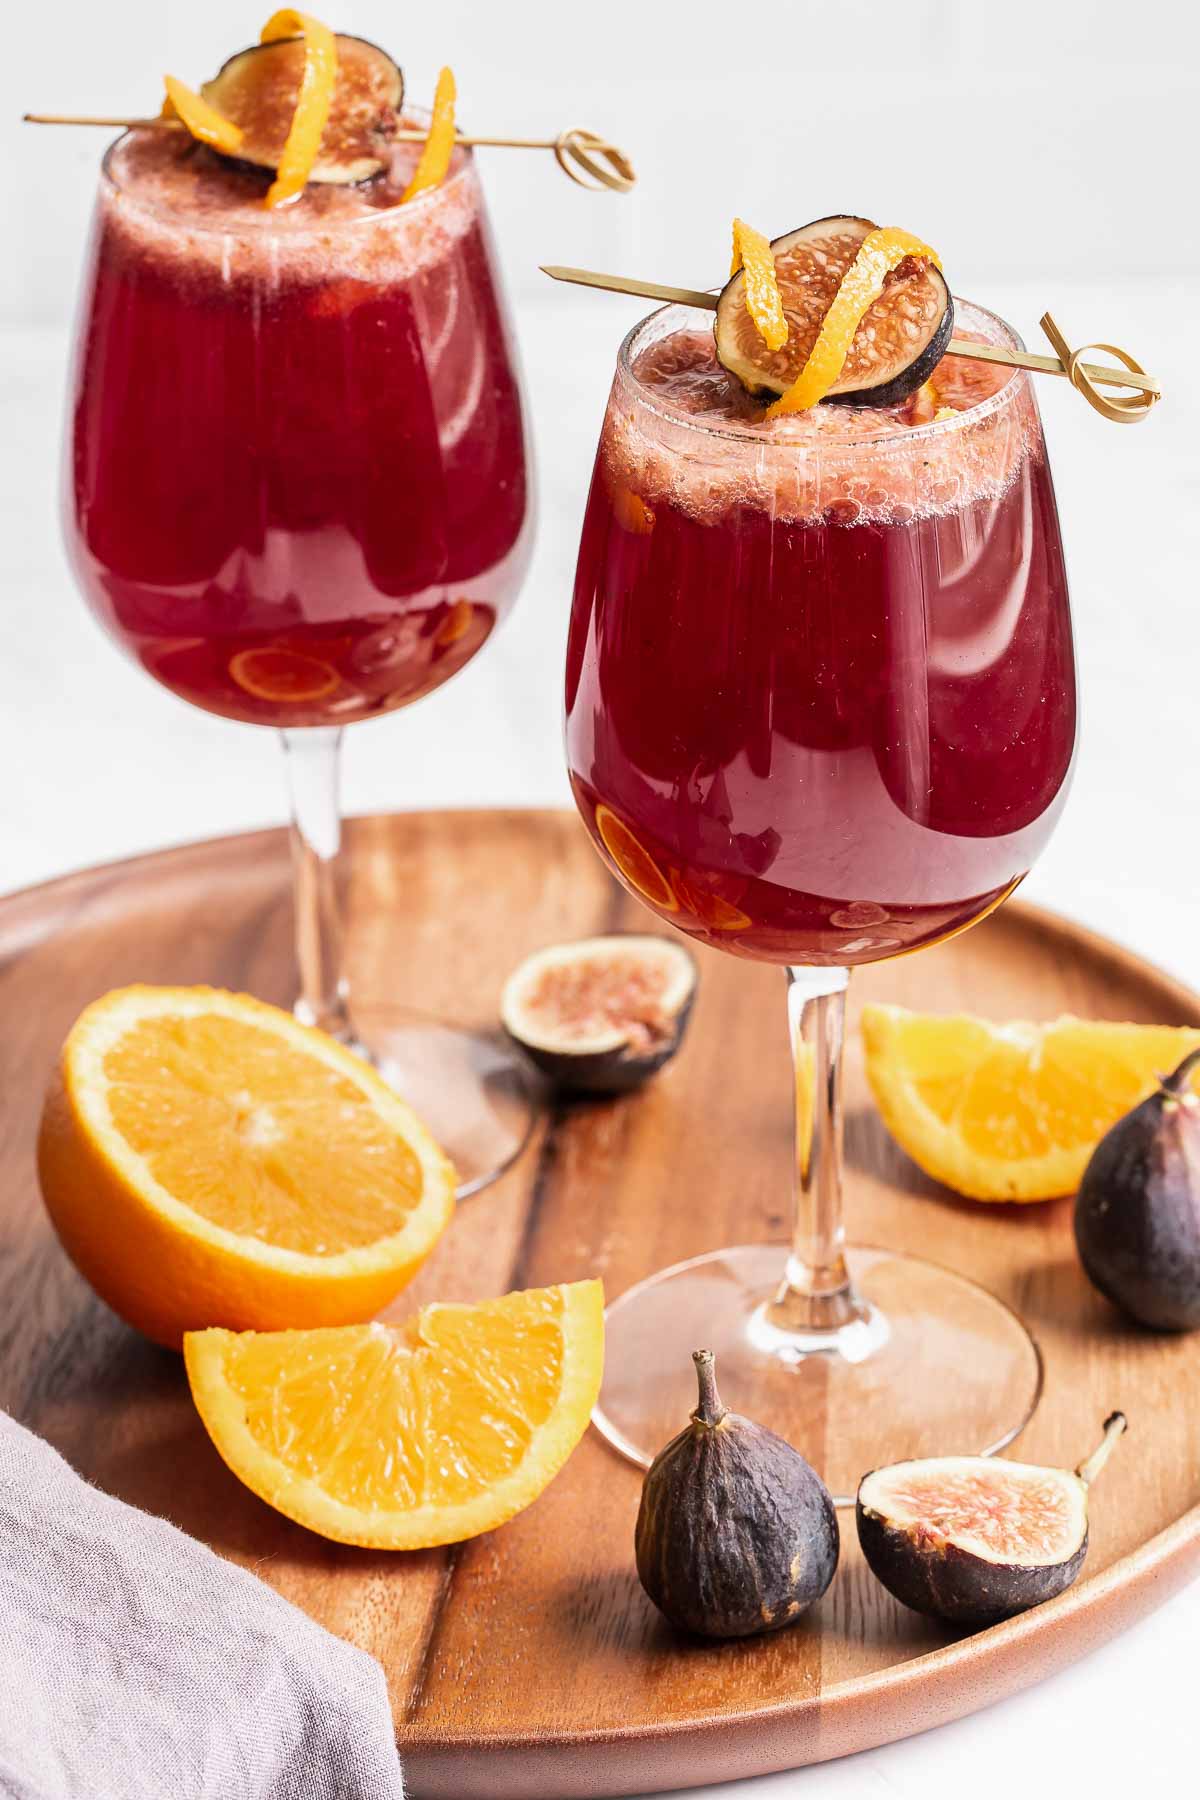 Two red wine sangria wine glasses on plate with oranges.